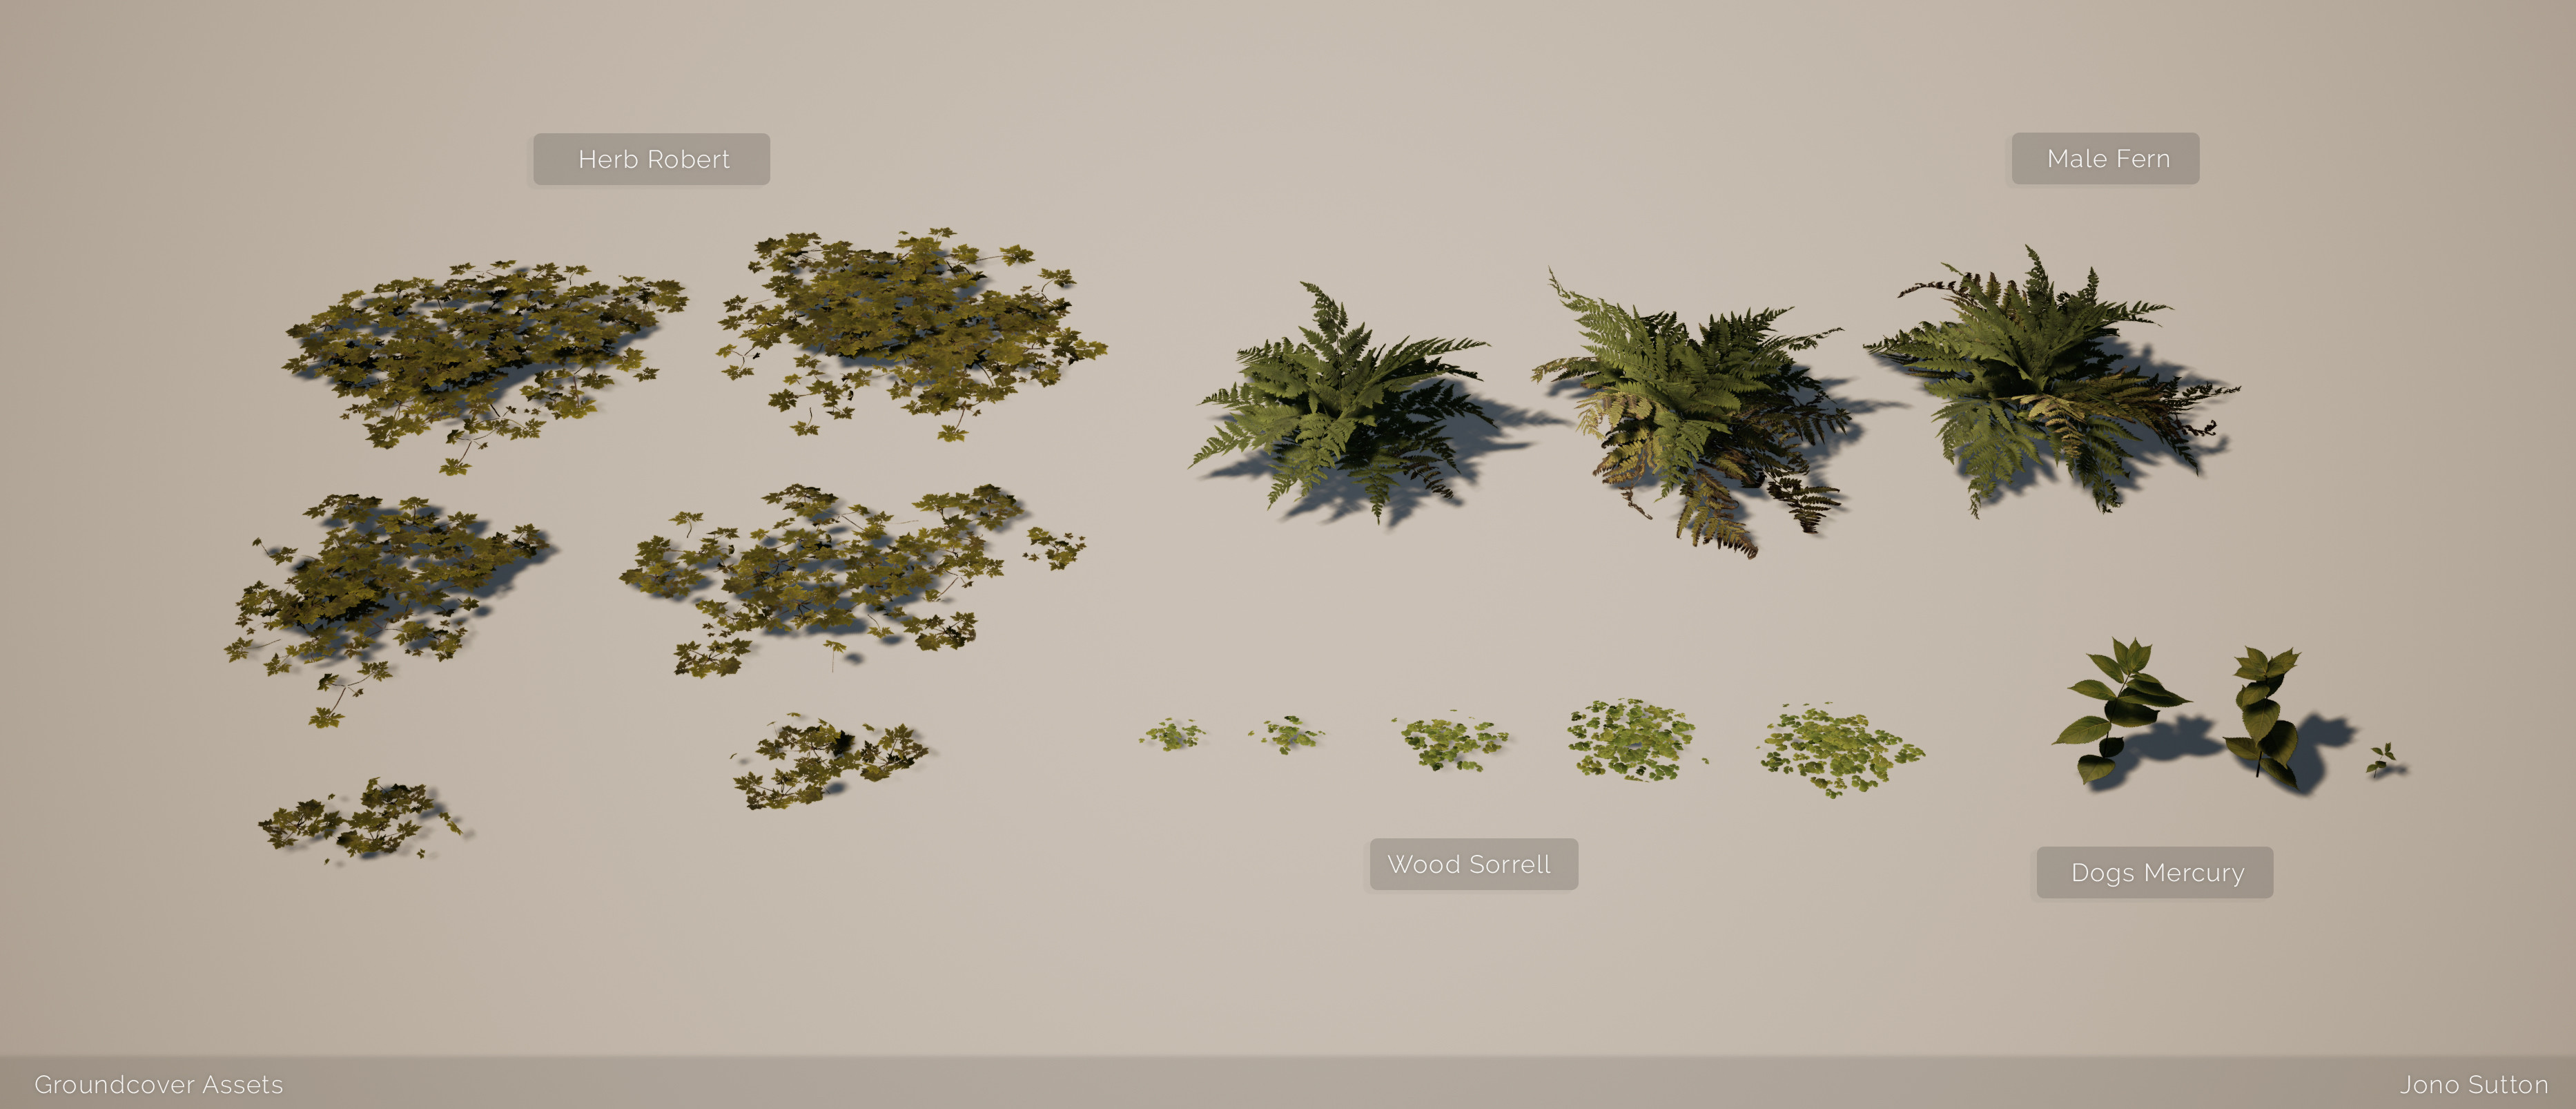 Using megascans atlases as a base, I created a set of optimised groundcover plants